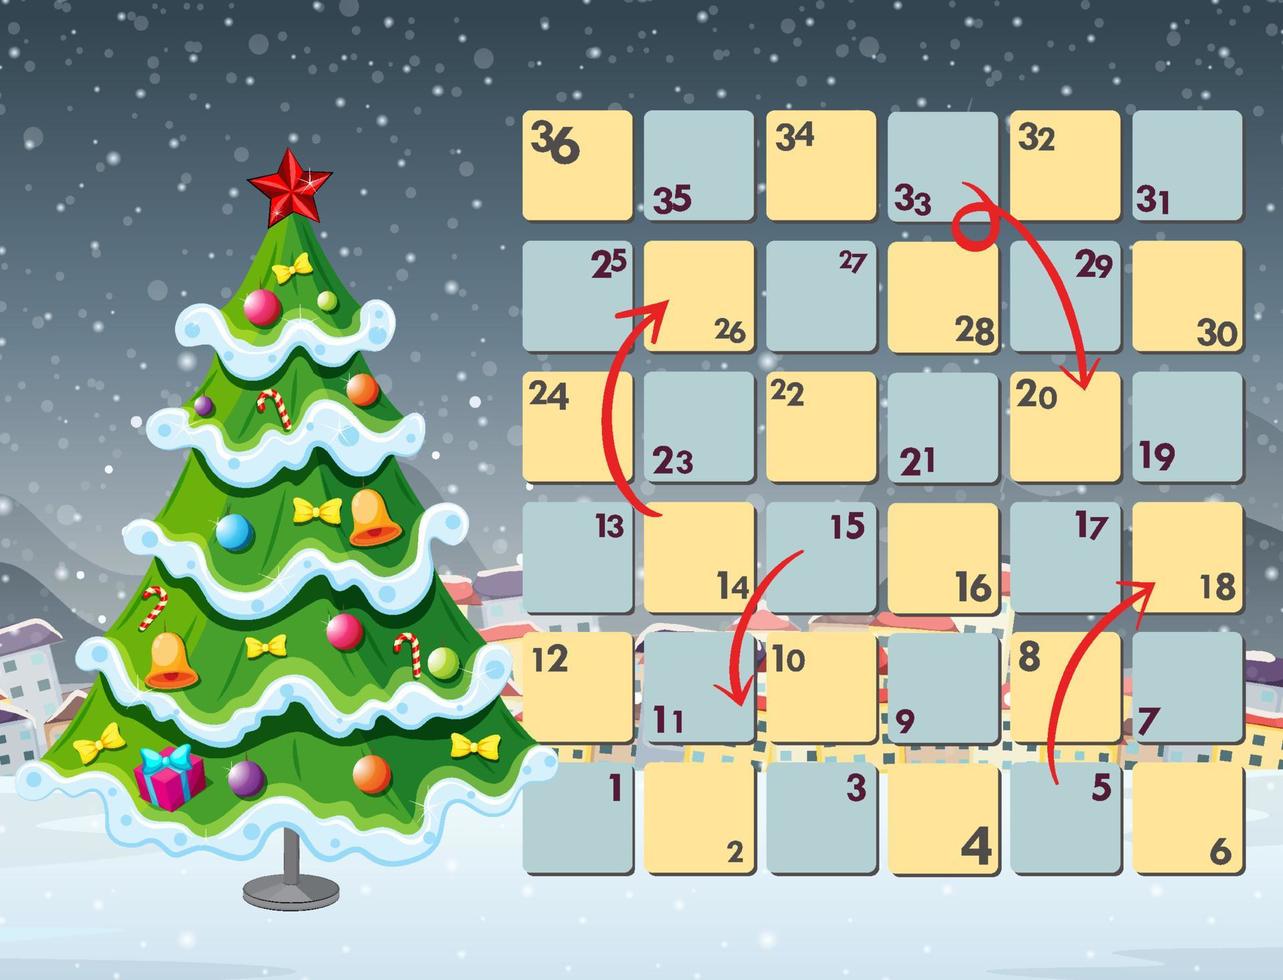 Snake and ladders game template with Christmas theme vector